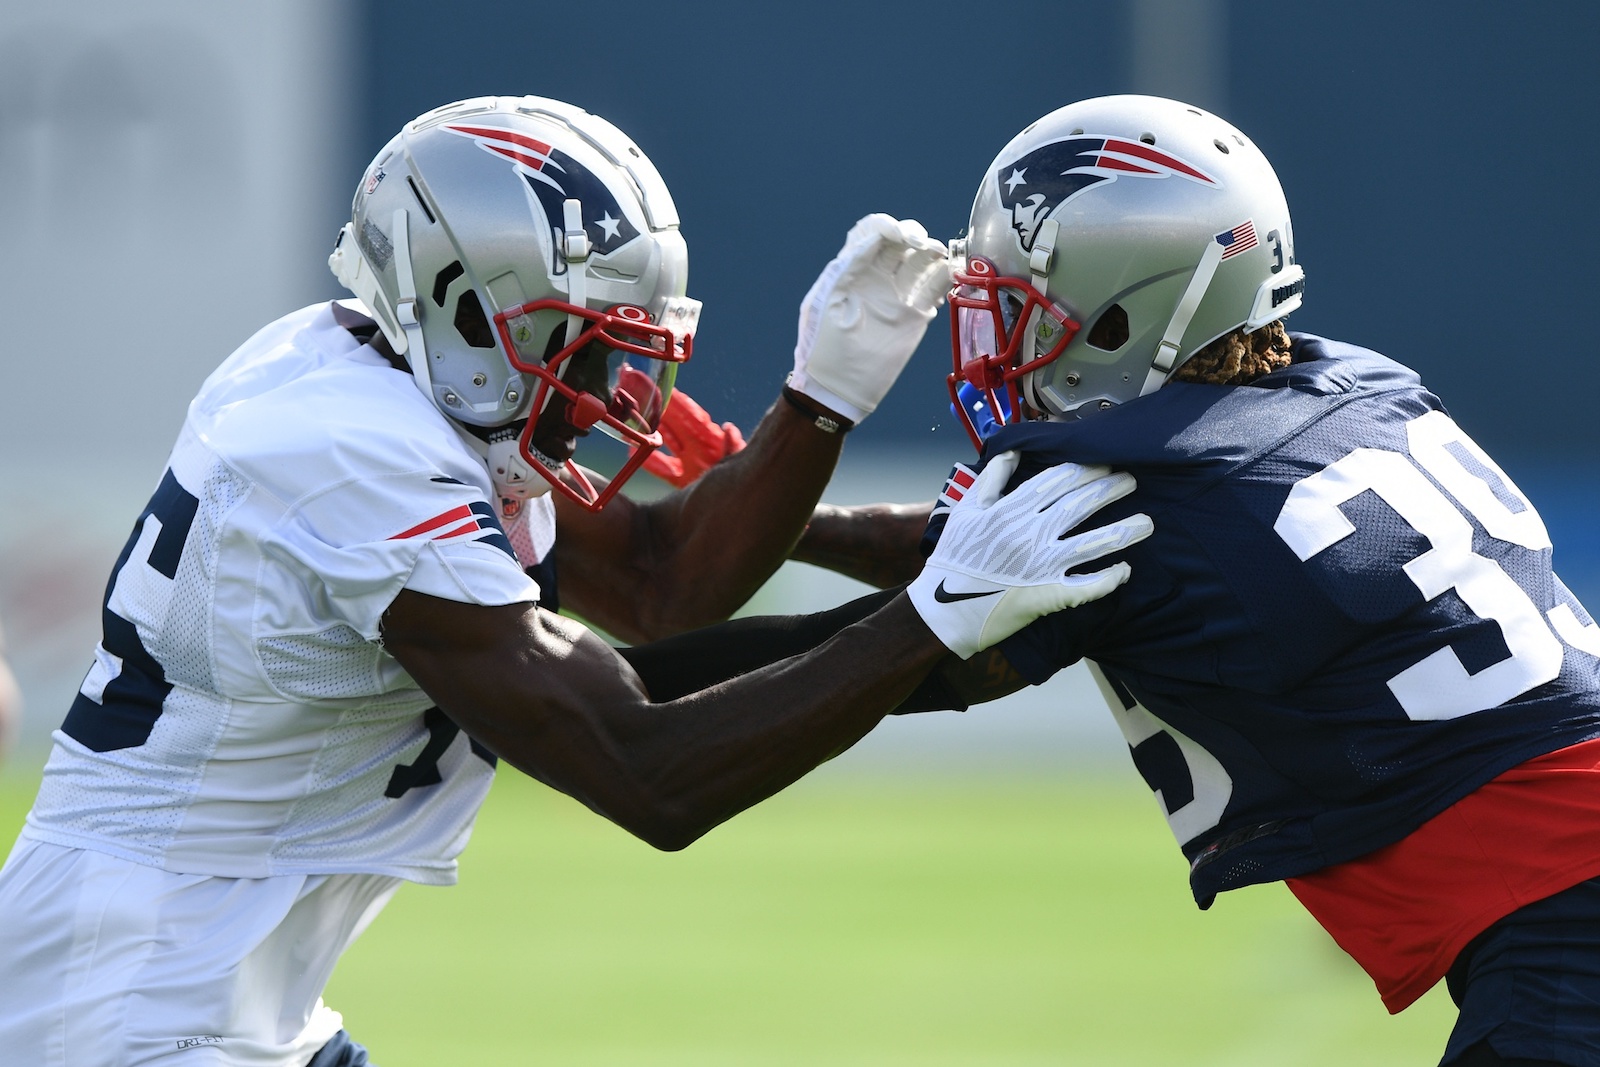 Jul 29, 2022; Foxborough, MA, USA; New England Patriots wide receiver Nelson Agholor (15) and defensive back Terrance Mitchell (39) run a drill during training camp at Gillette Stadium. Mandatory Credit: Brian Fluharty/USA TODAY Sports